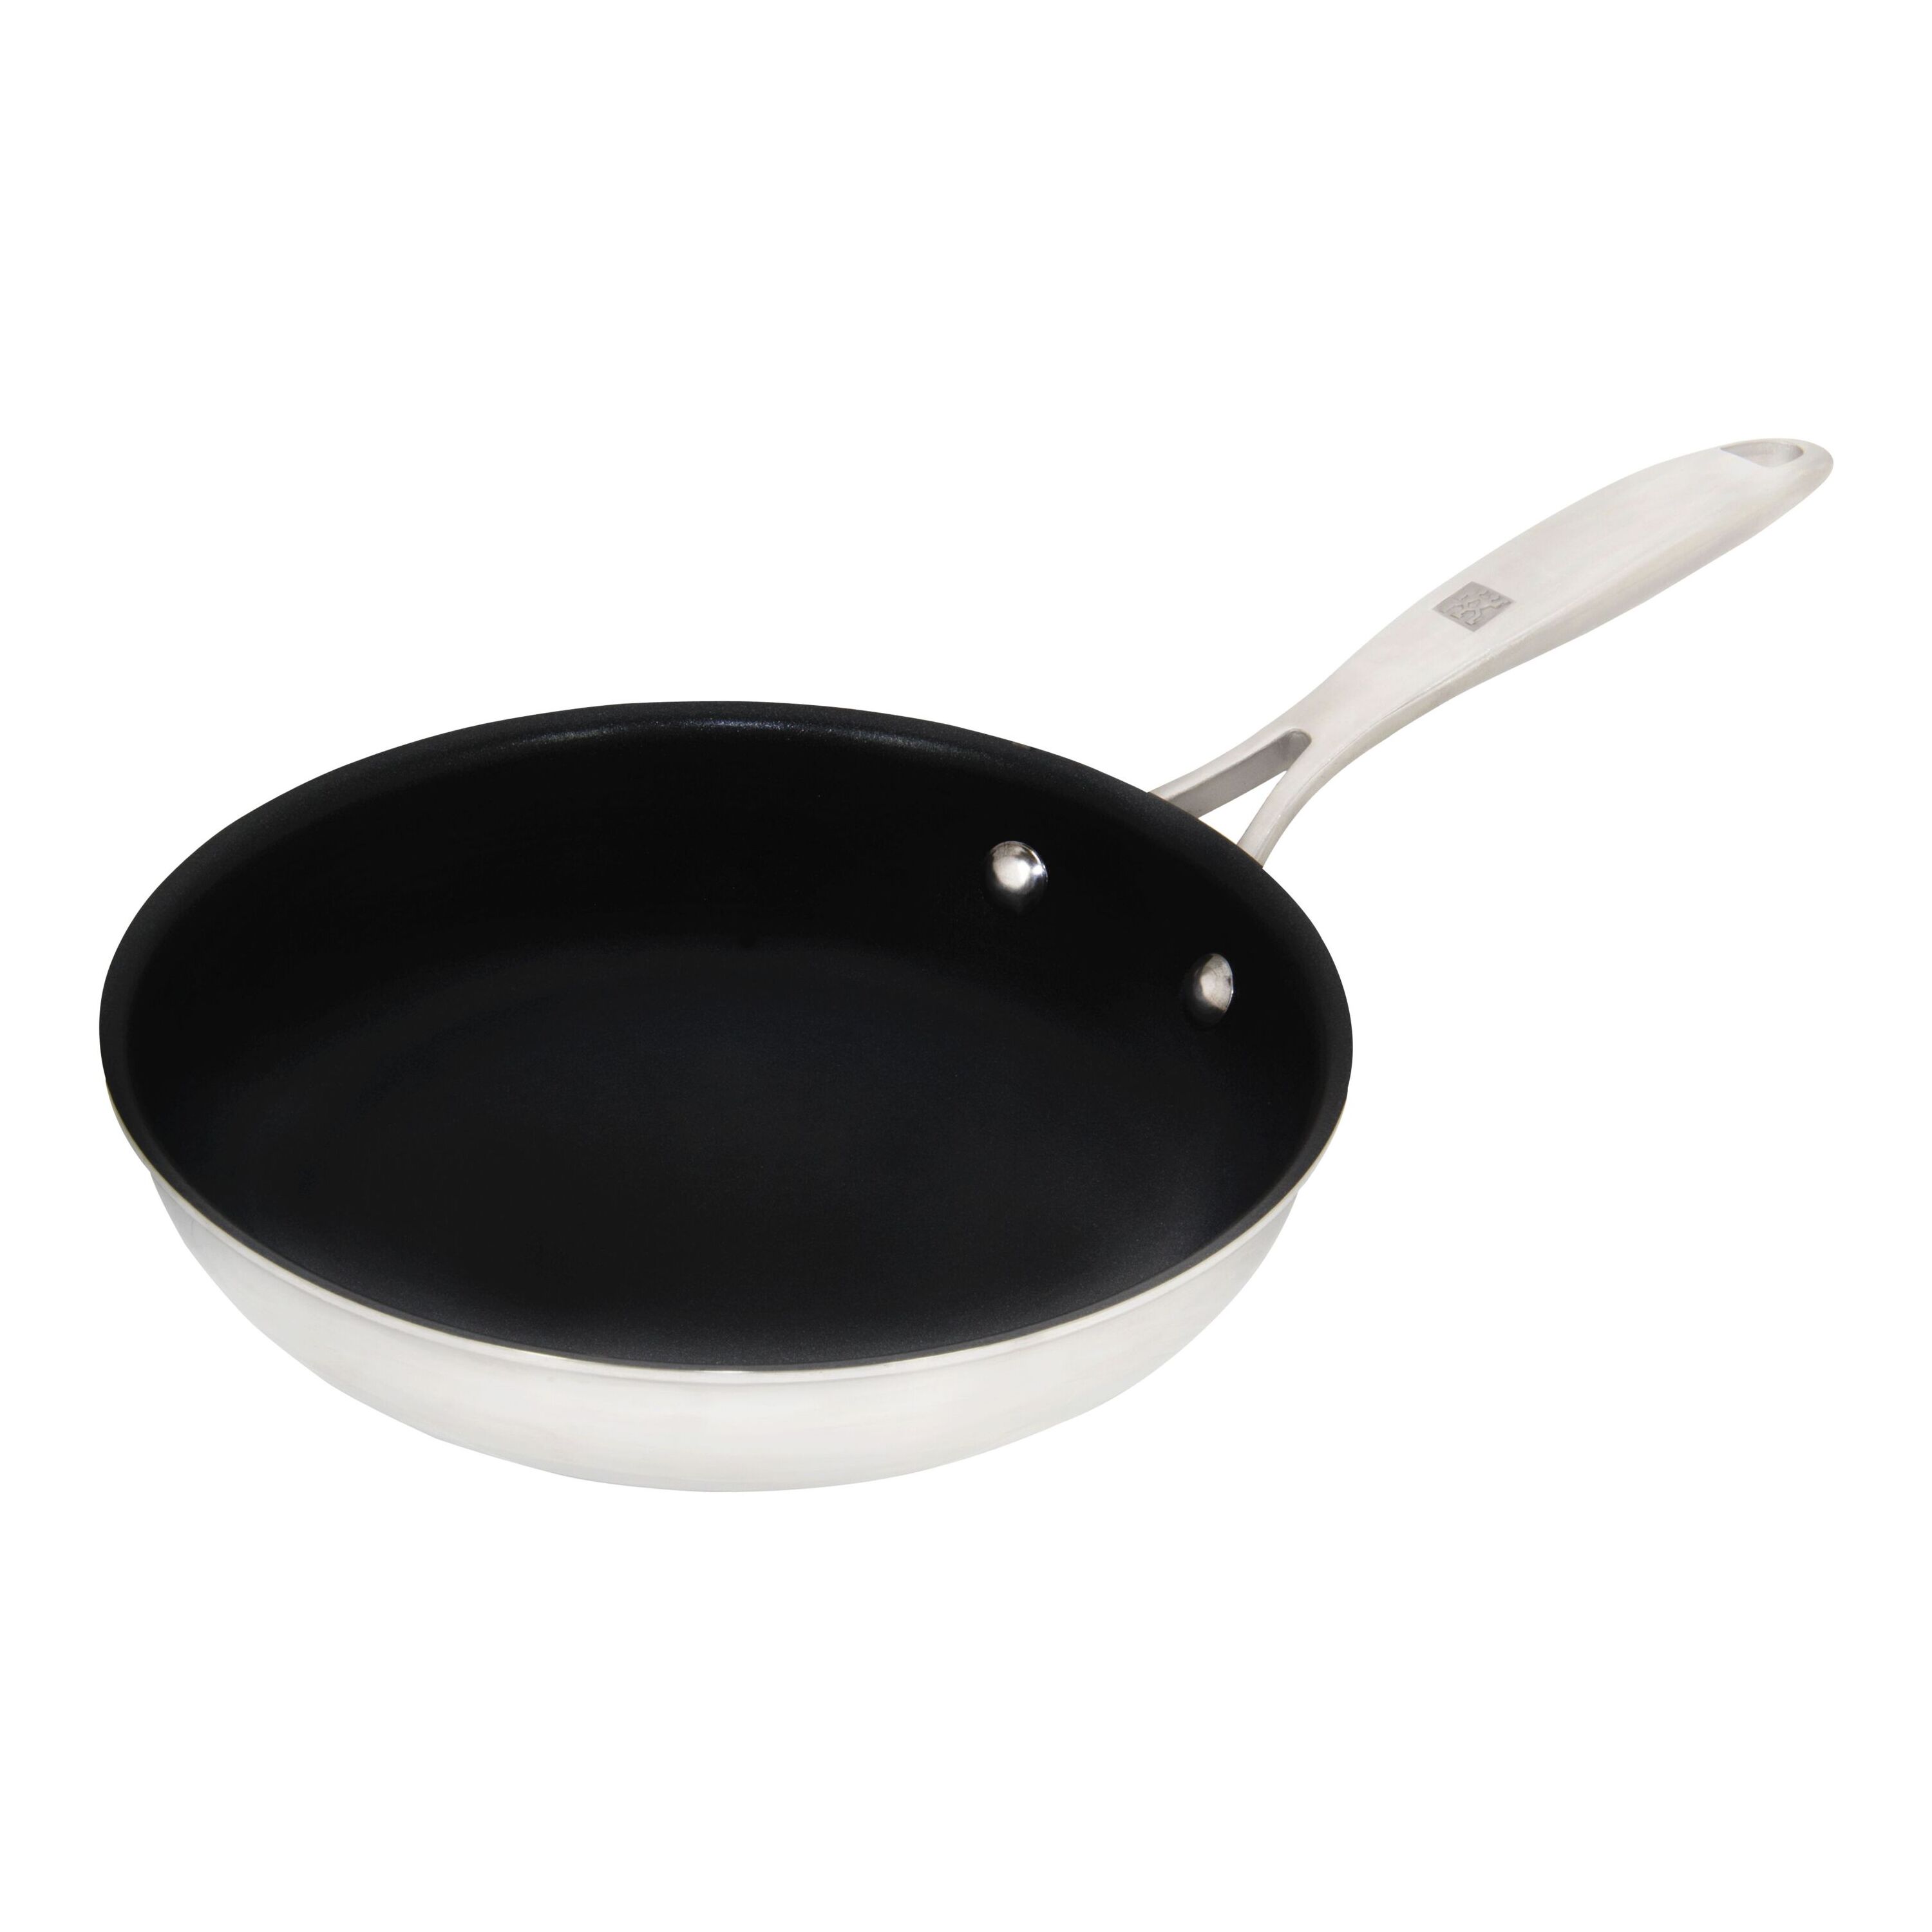 Zwilling 32 cm Wok with Lid – Non-Stick Coating, Stainless-Steel - Home of  Brands